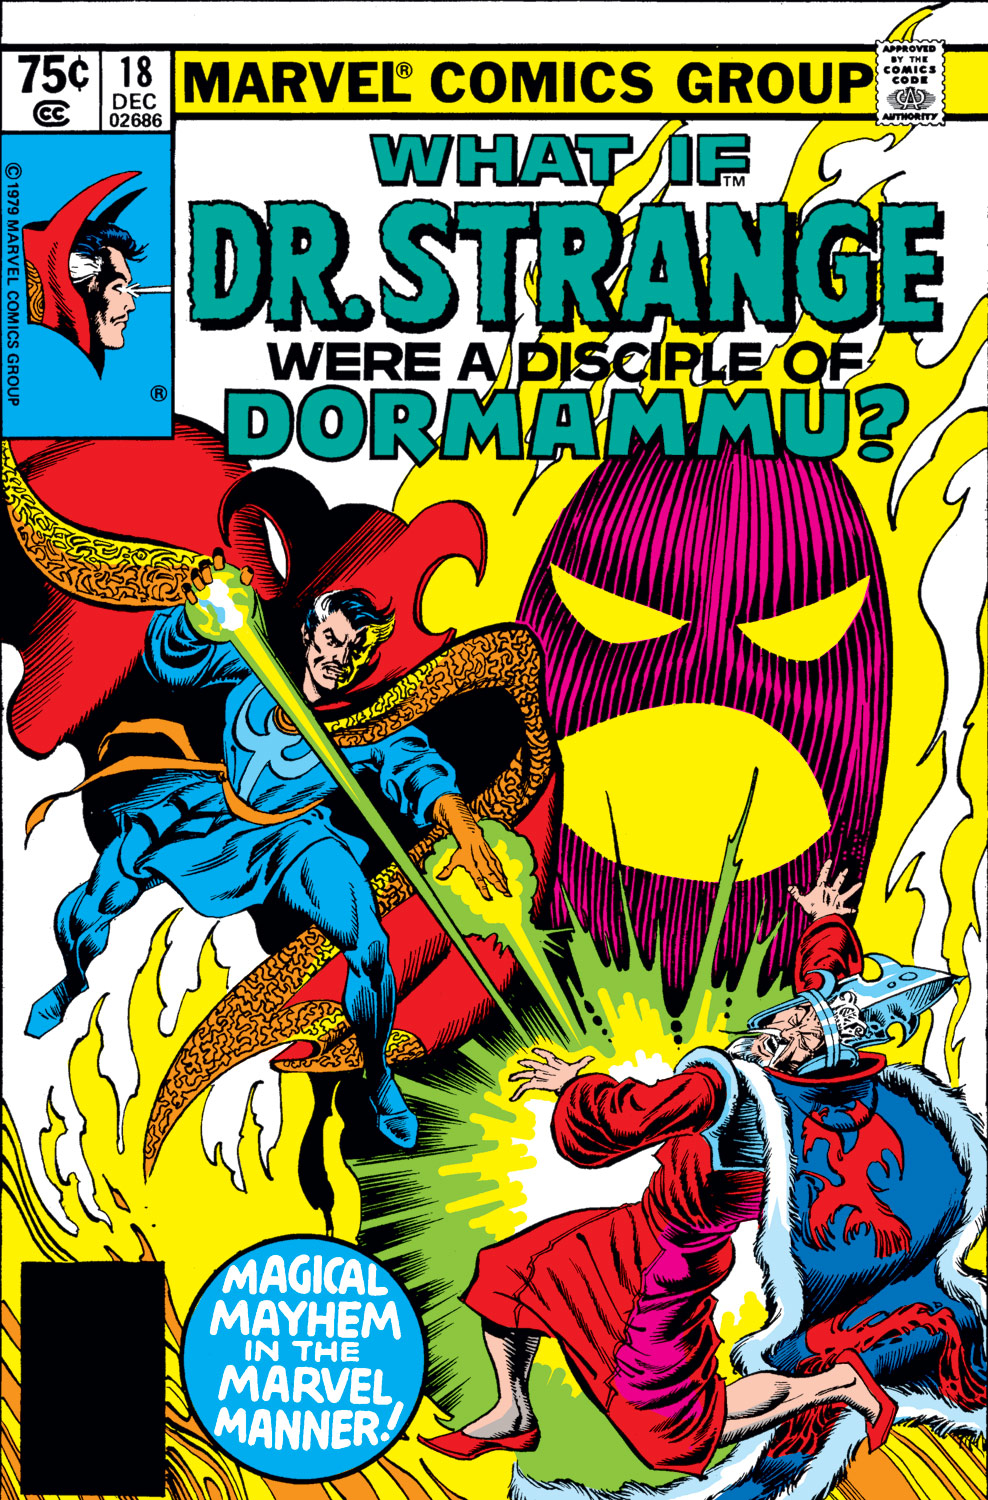 Read online What If? (1977) comic -  Issue #18 - Dr. Strange were a disciple of Dormammu - 1